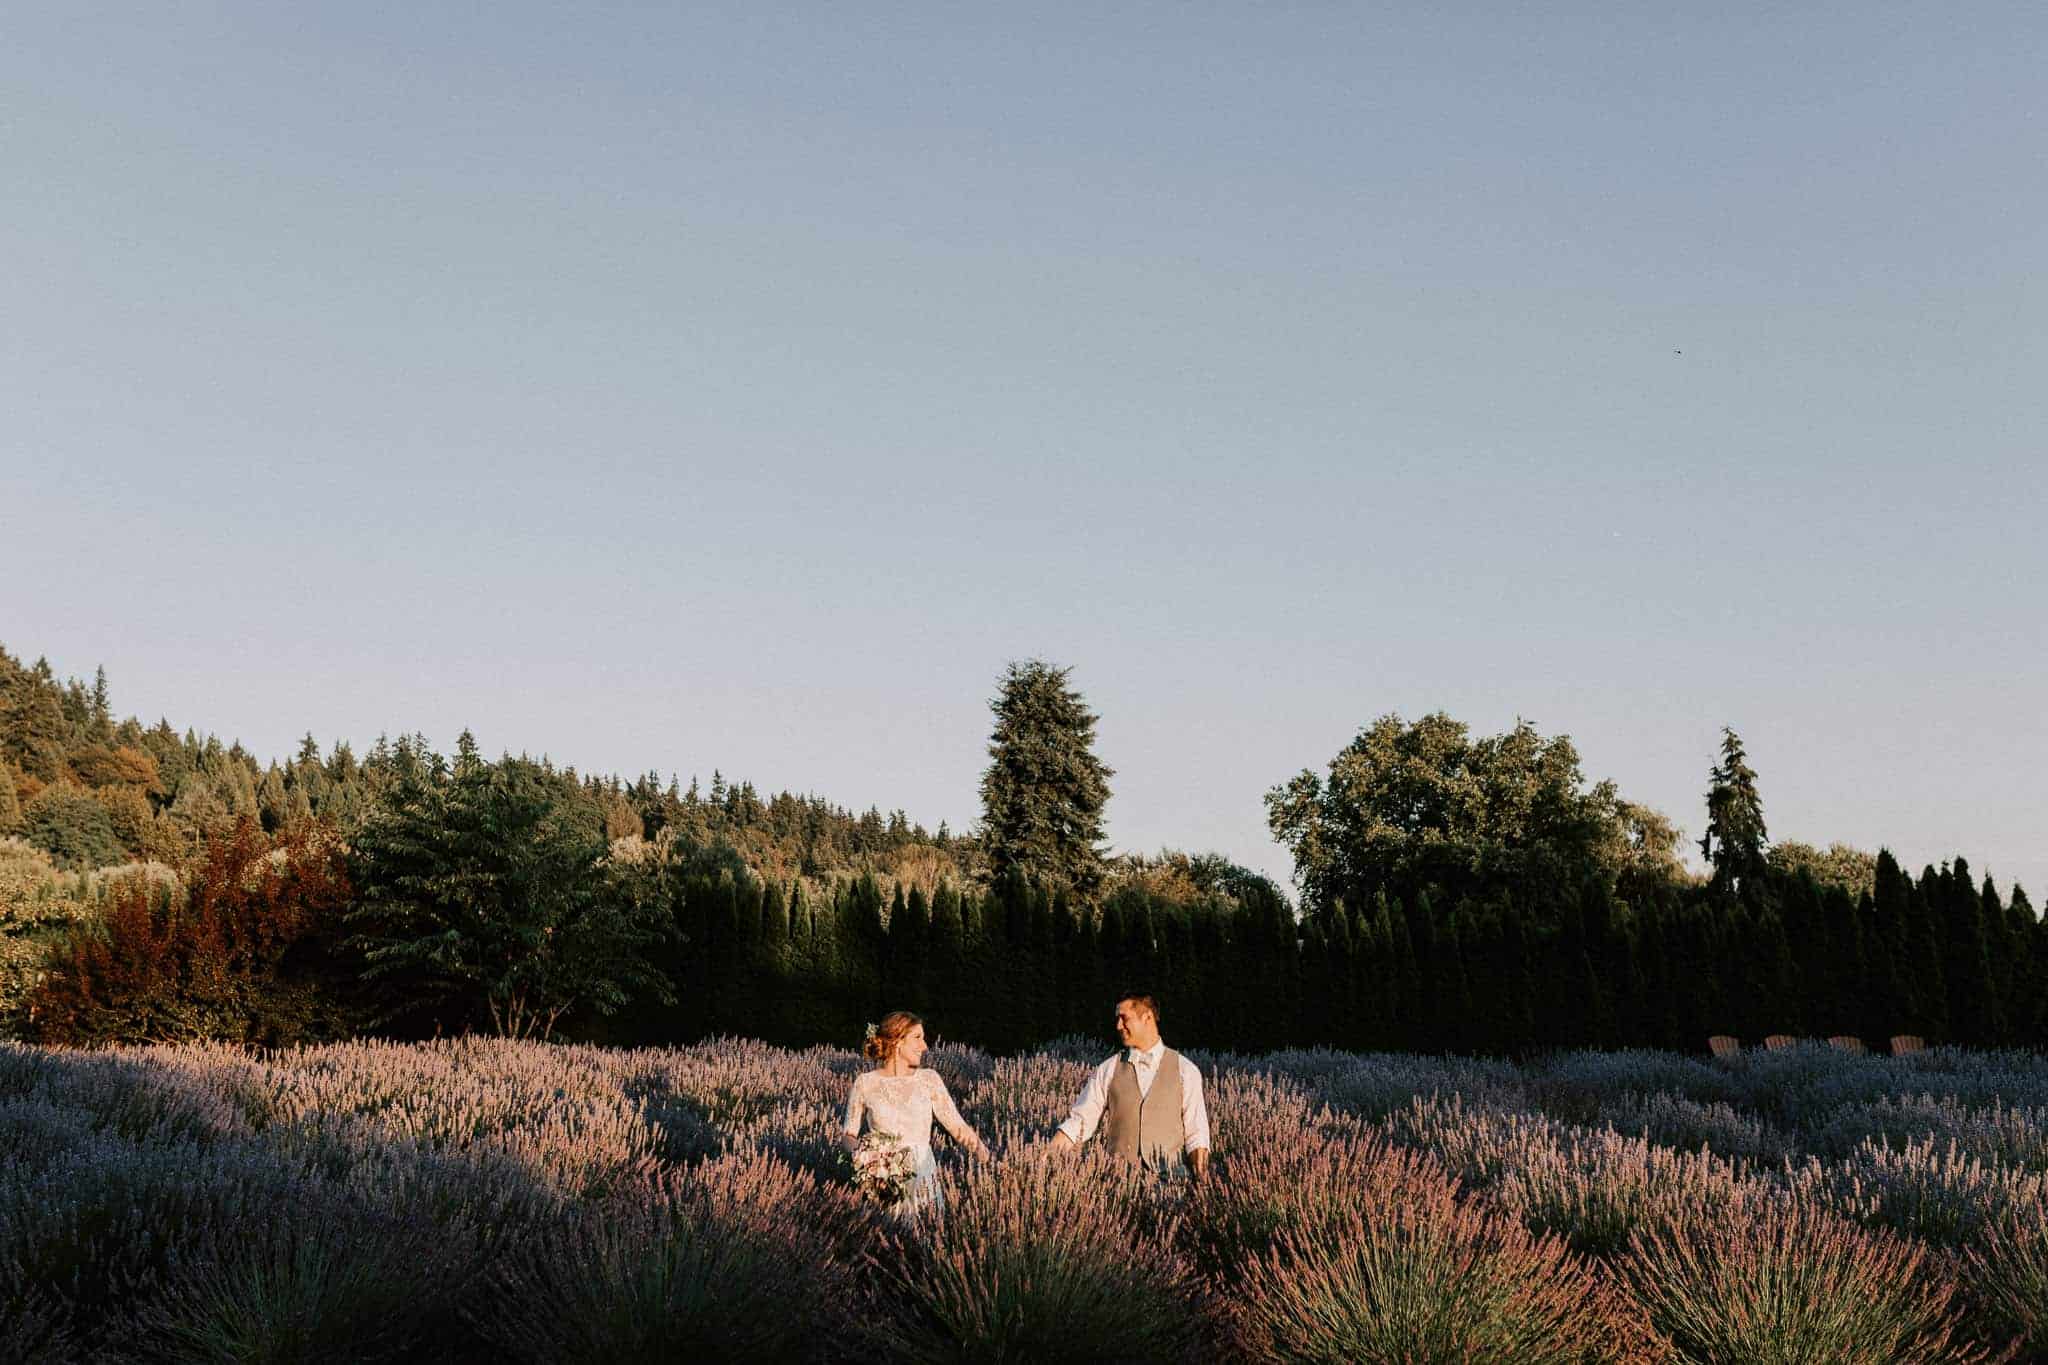 Woodinville Lavender Farm wedding venue at sunset by Kyle Goldie of Luma Weddings